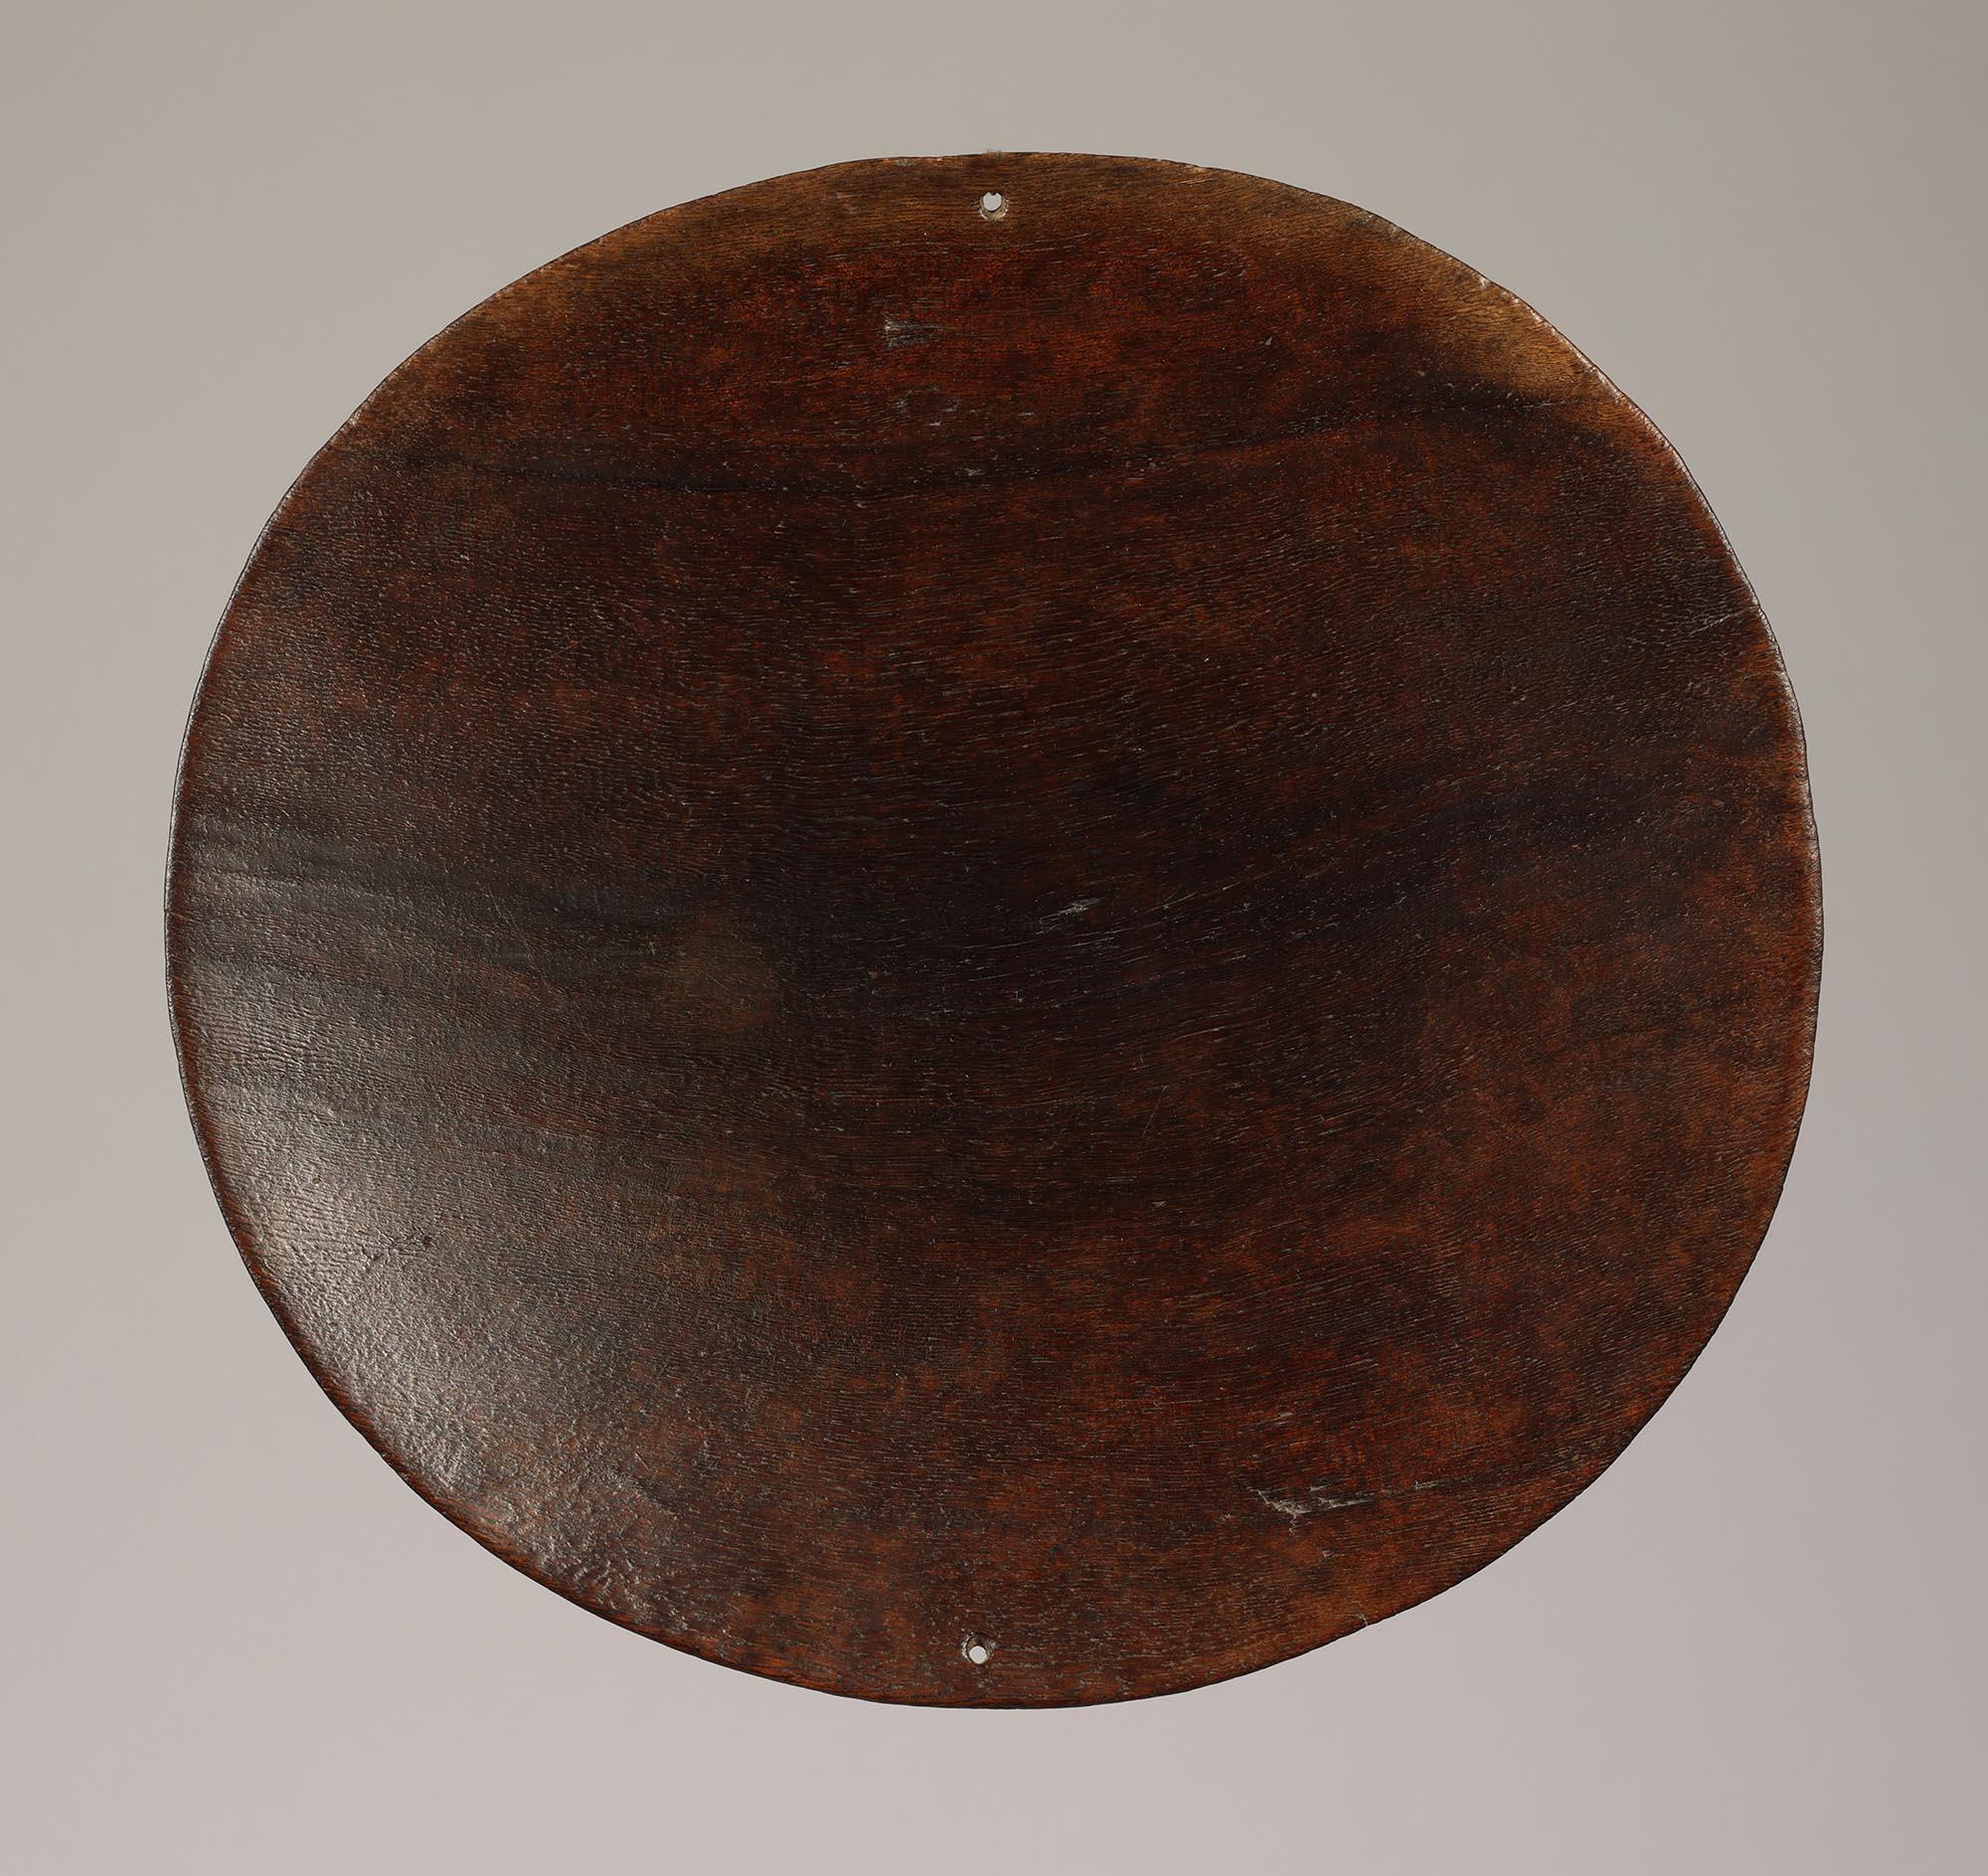 Ancient Fiji Islands Flat Serving Bowl or Platter 19th century, made of very dense hardwood with deep patina, and expected wear on bottom.  Two small opposing holes for suspension.
Bowl is 14 1/4